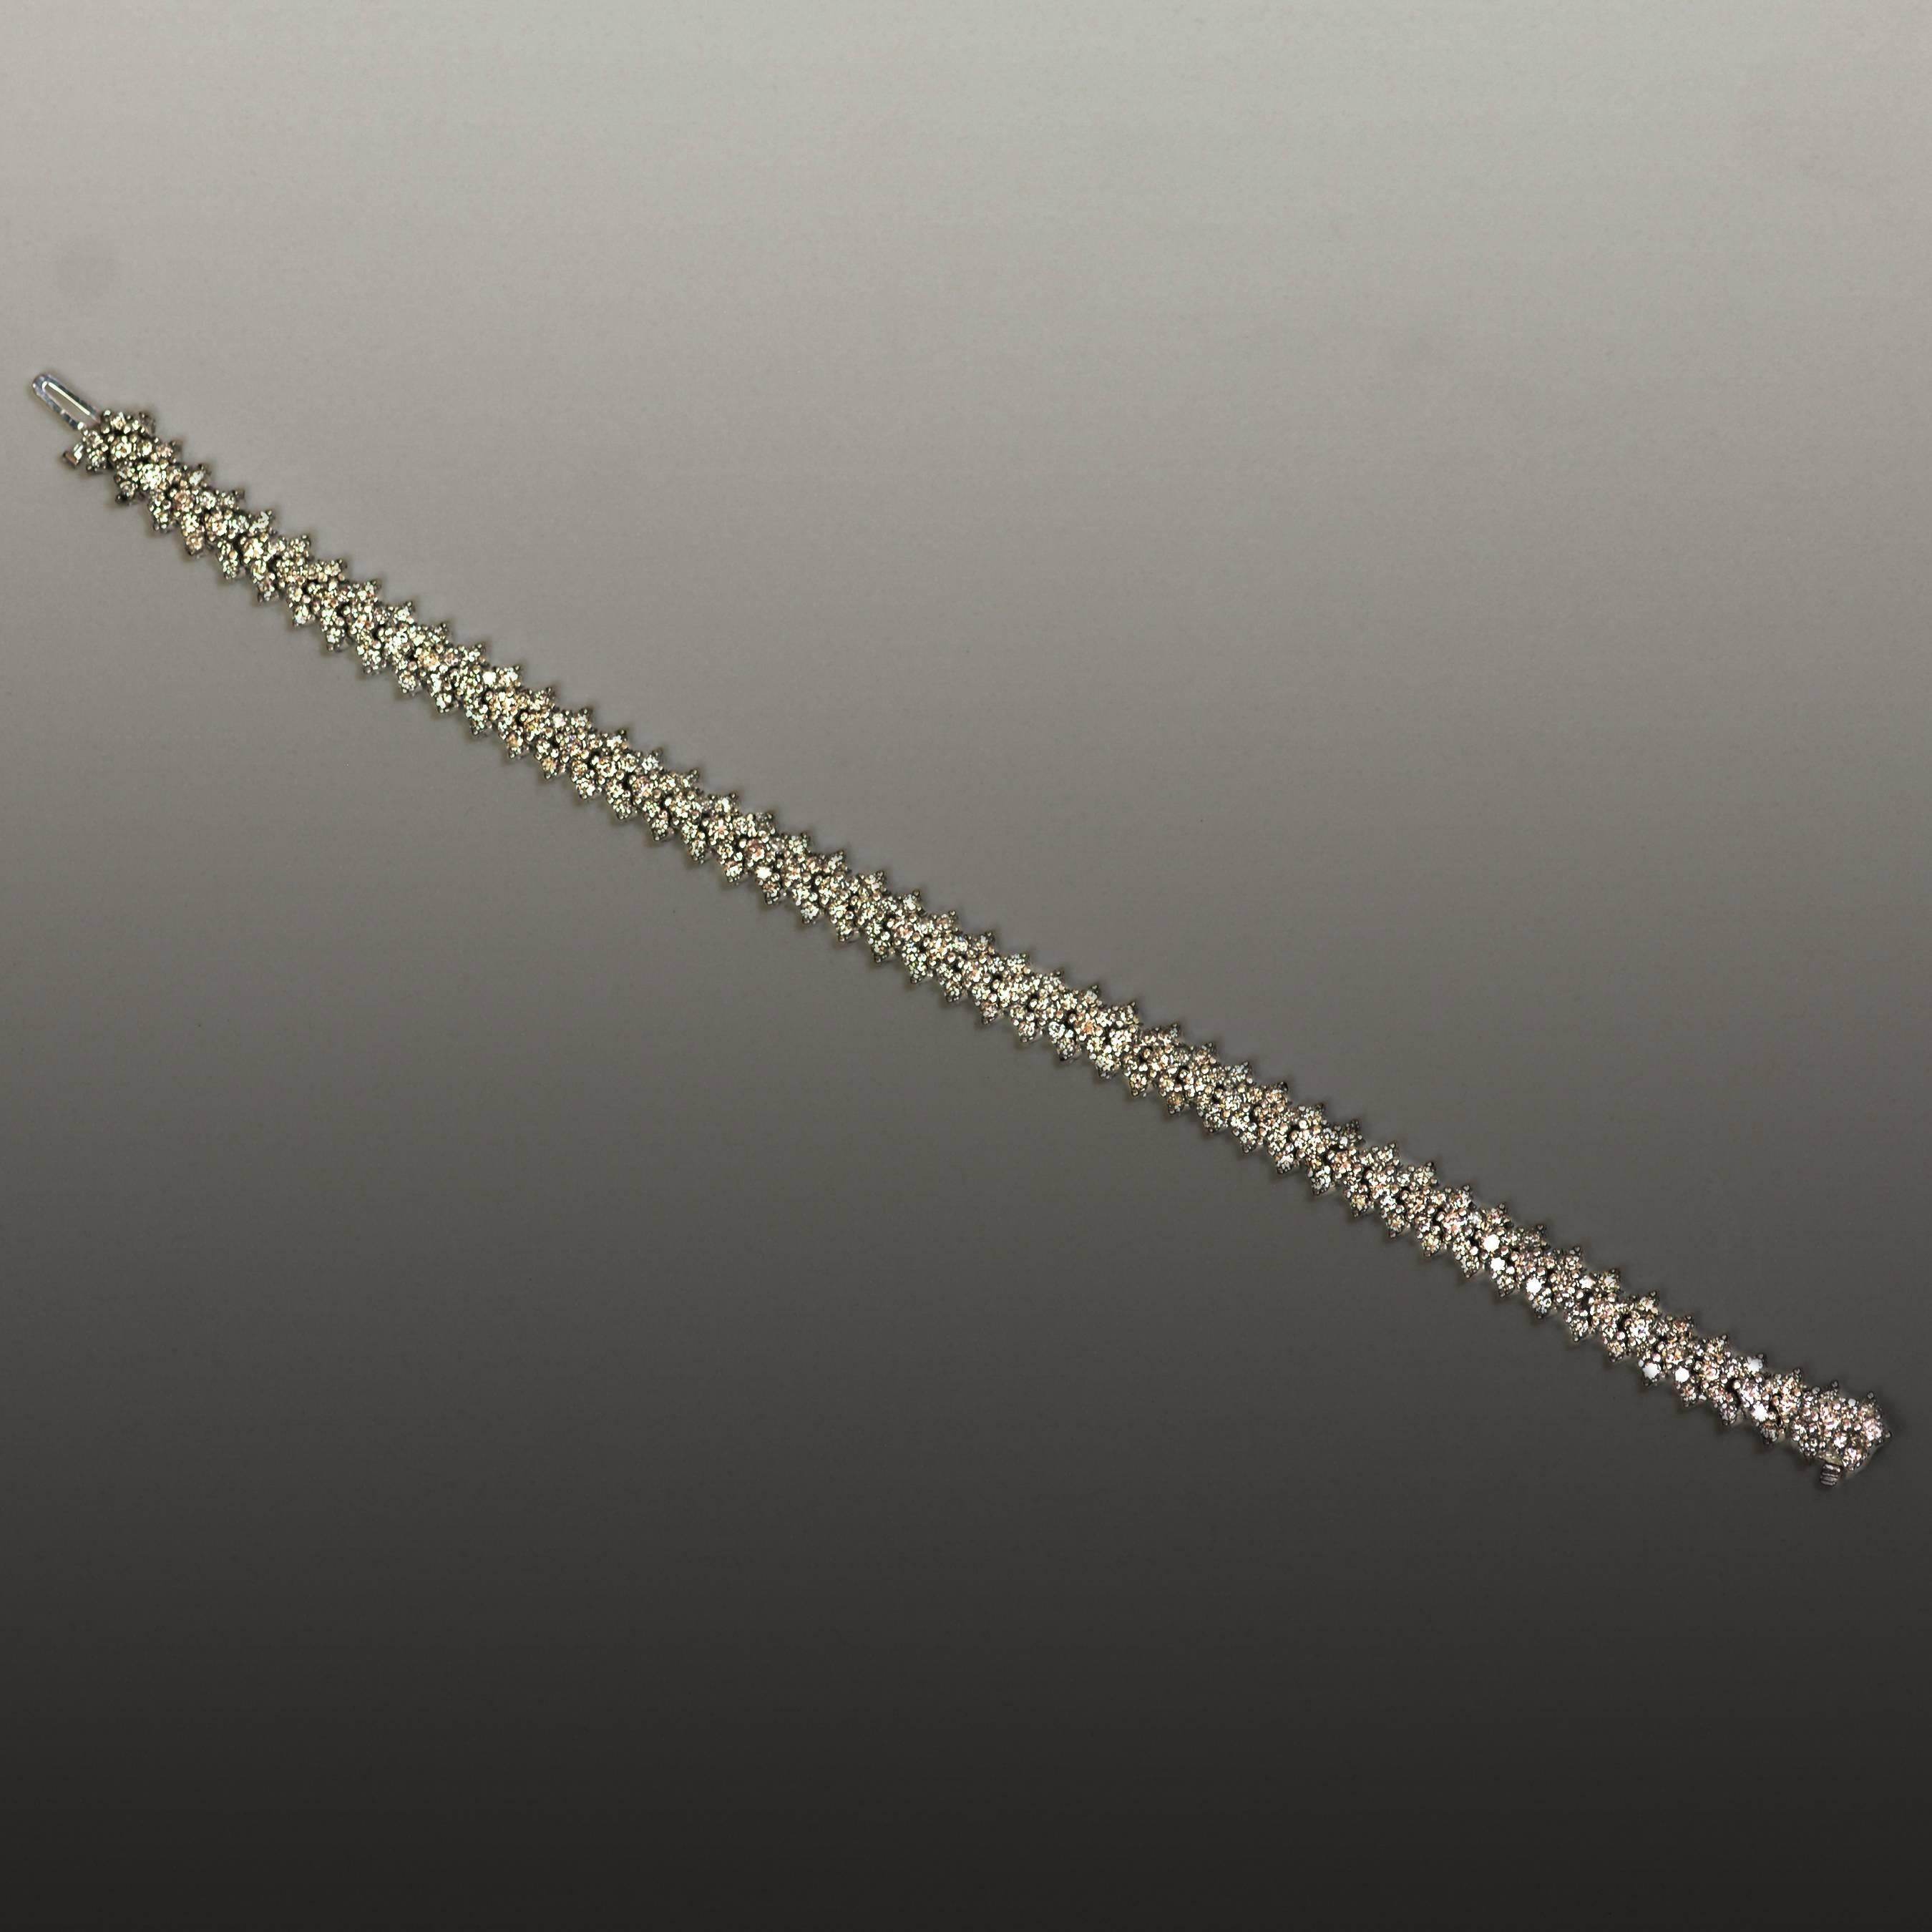 14k White gold bracelet with 245 round brilliant diamonds weighing approximately 5.50 carats. 7"